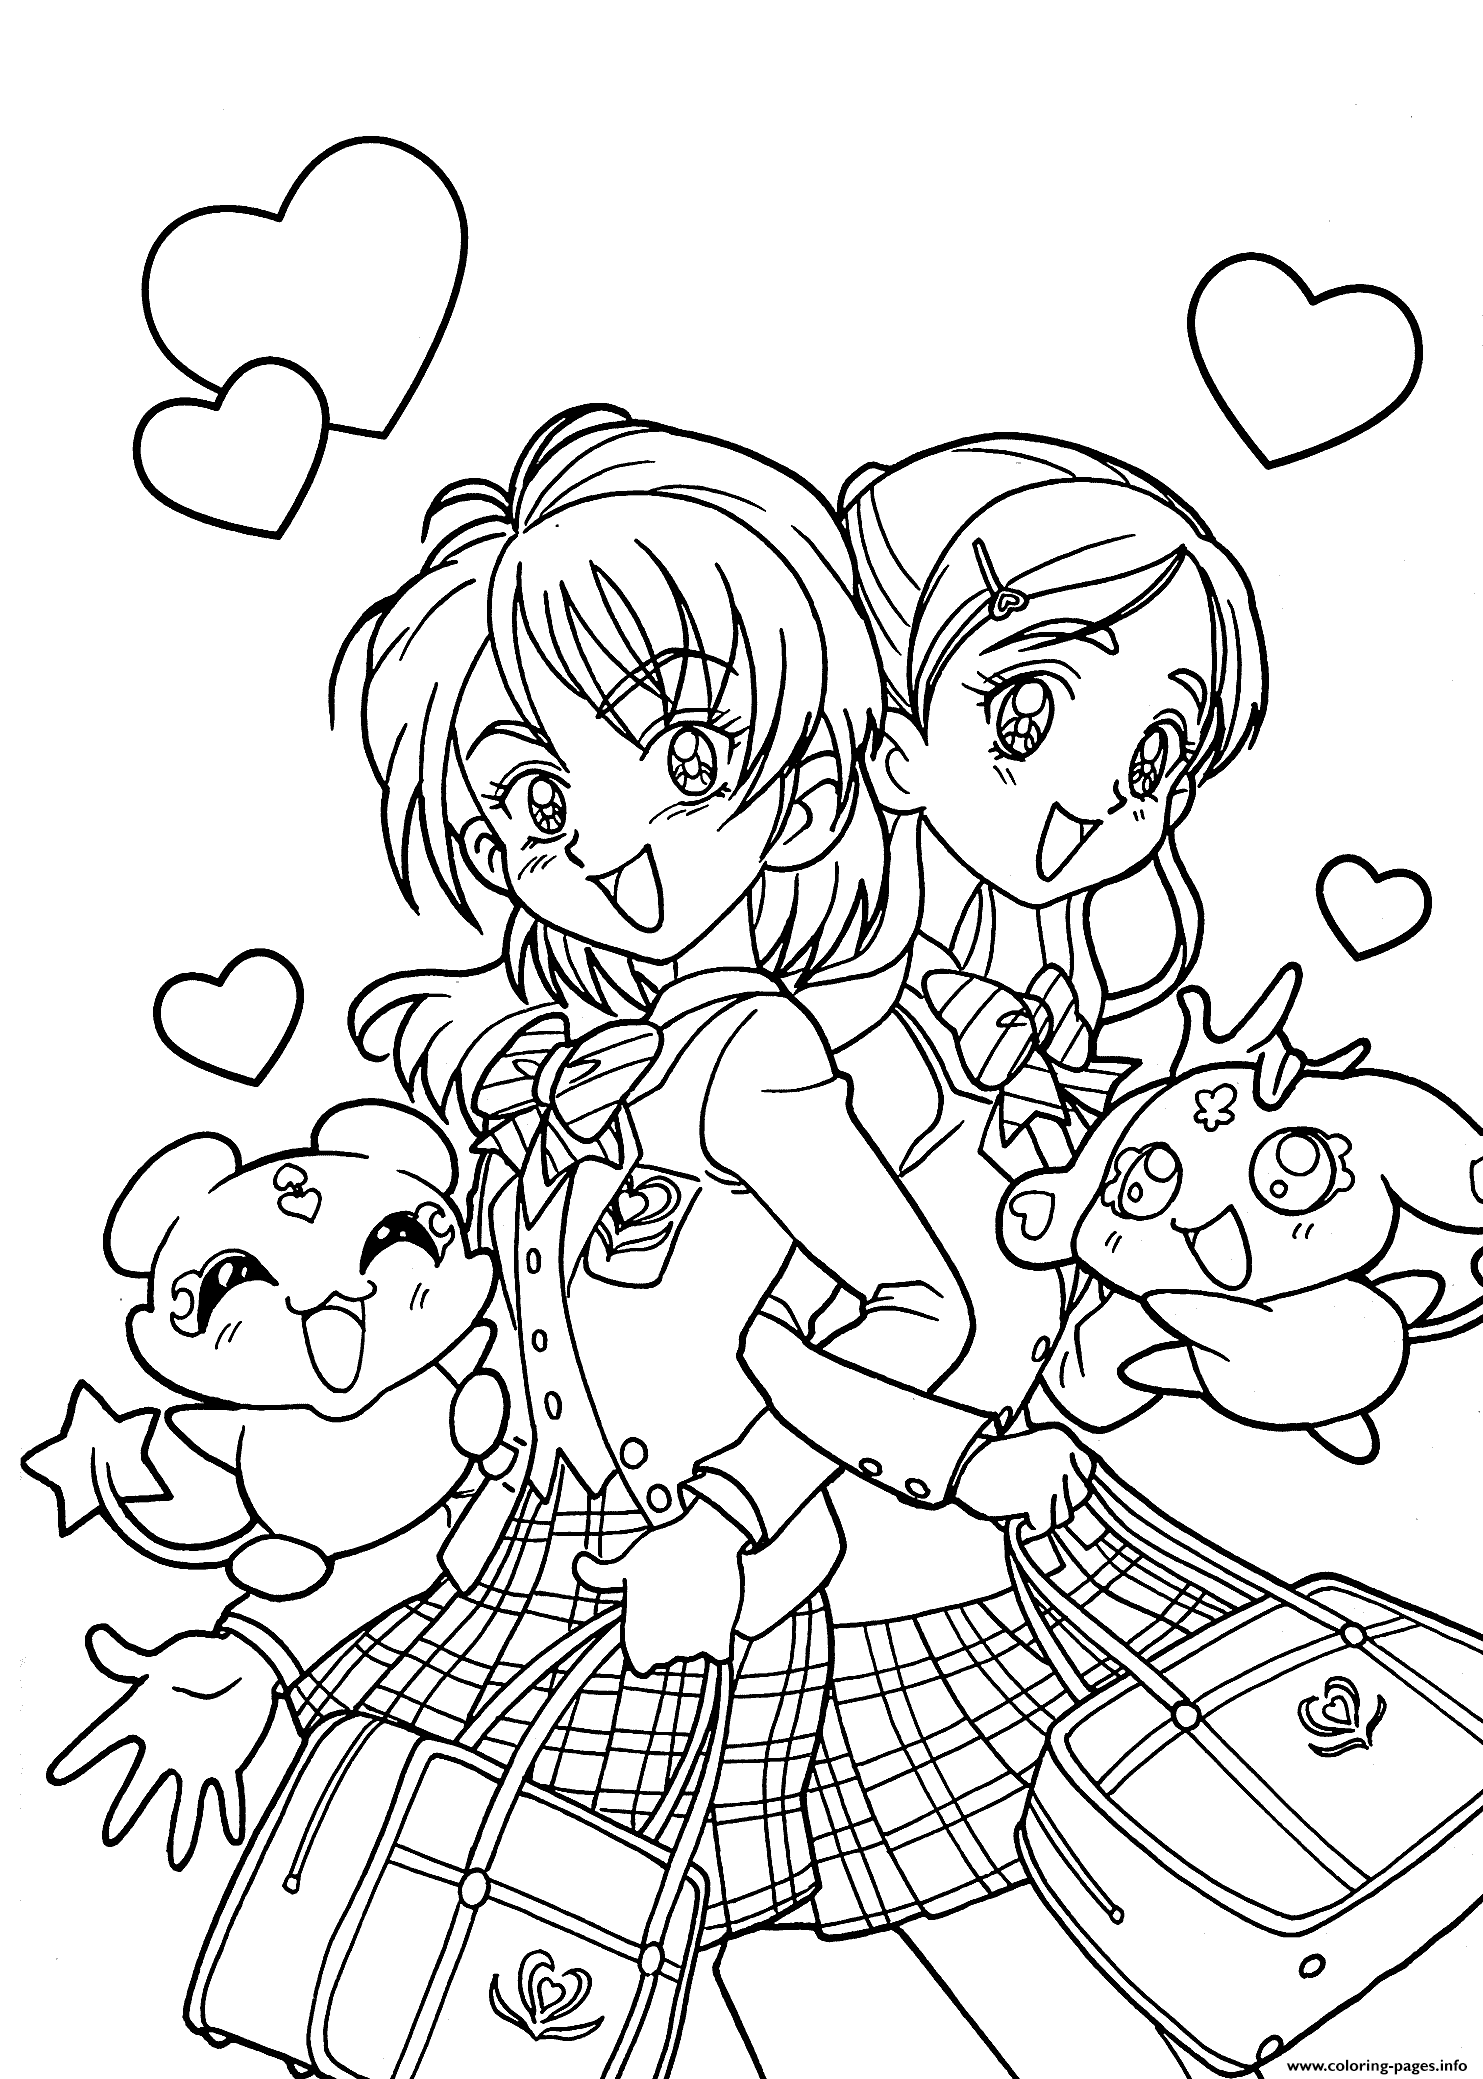 Funny Pretty Anime Girls Coloring page Printable